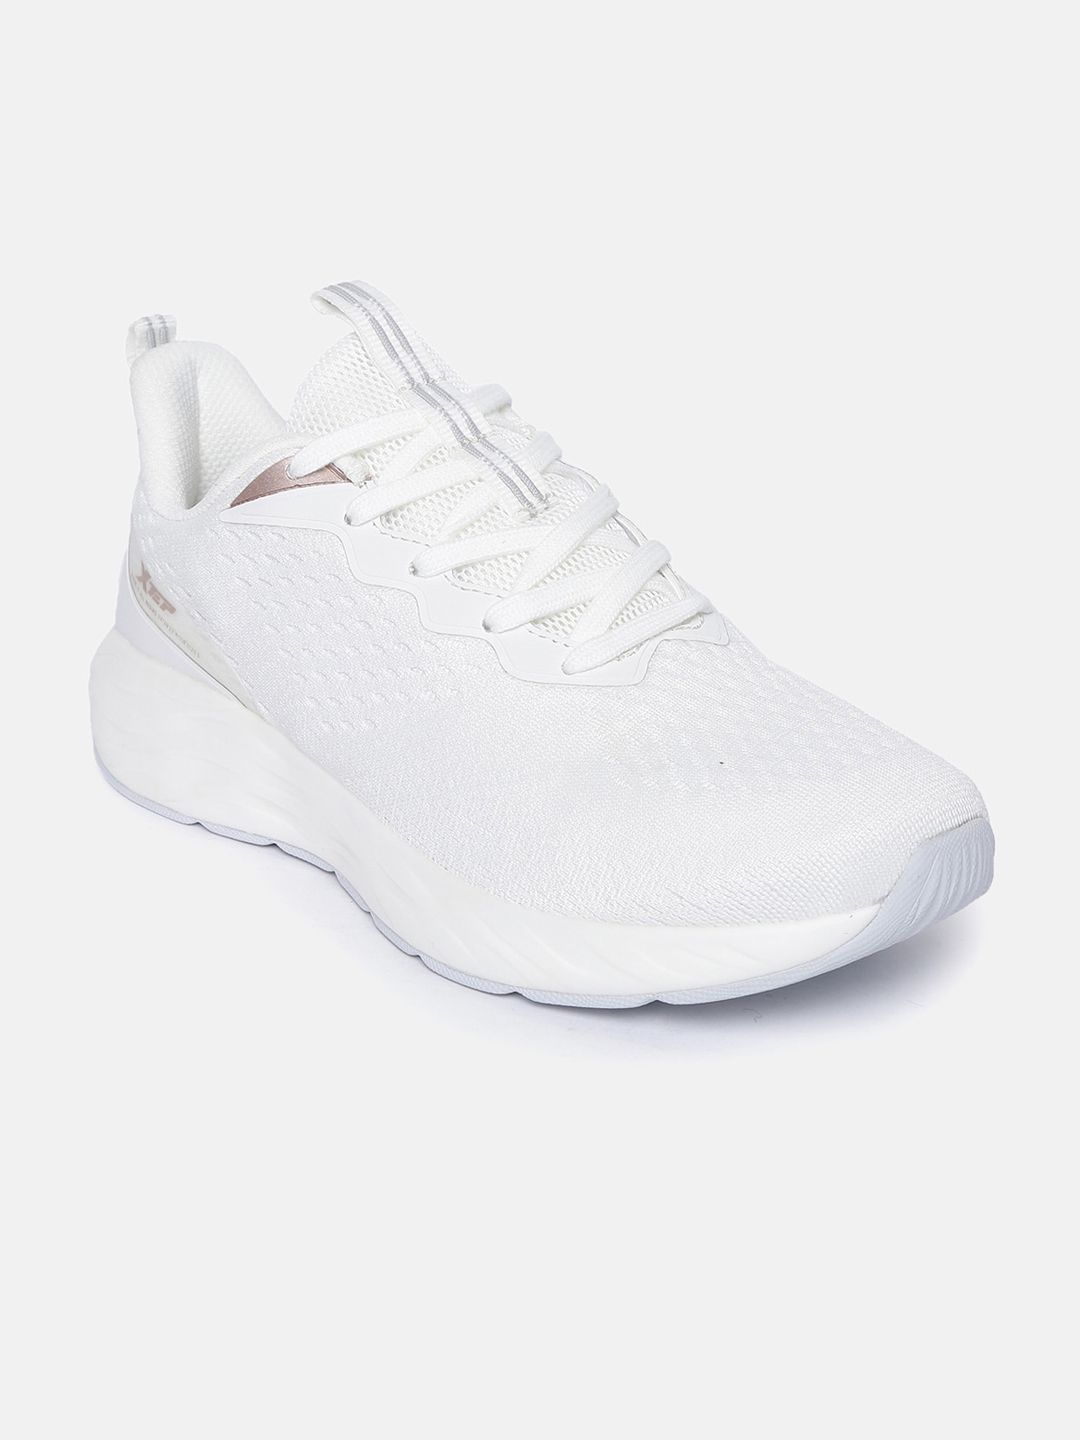 Xtep Women White Solid Textile Running Shoes Price in India